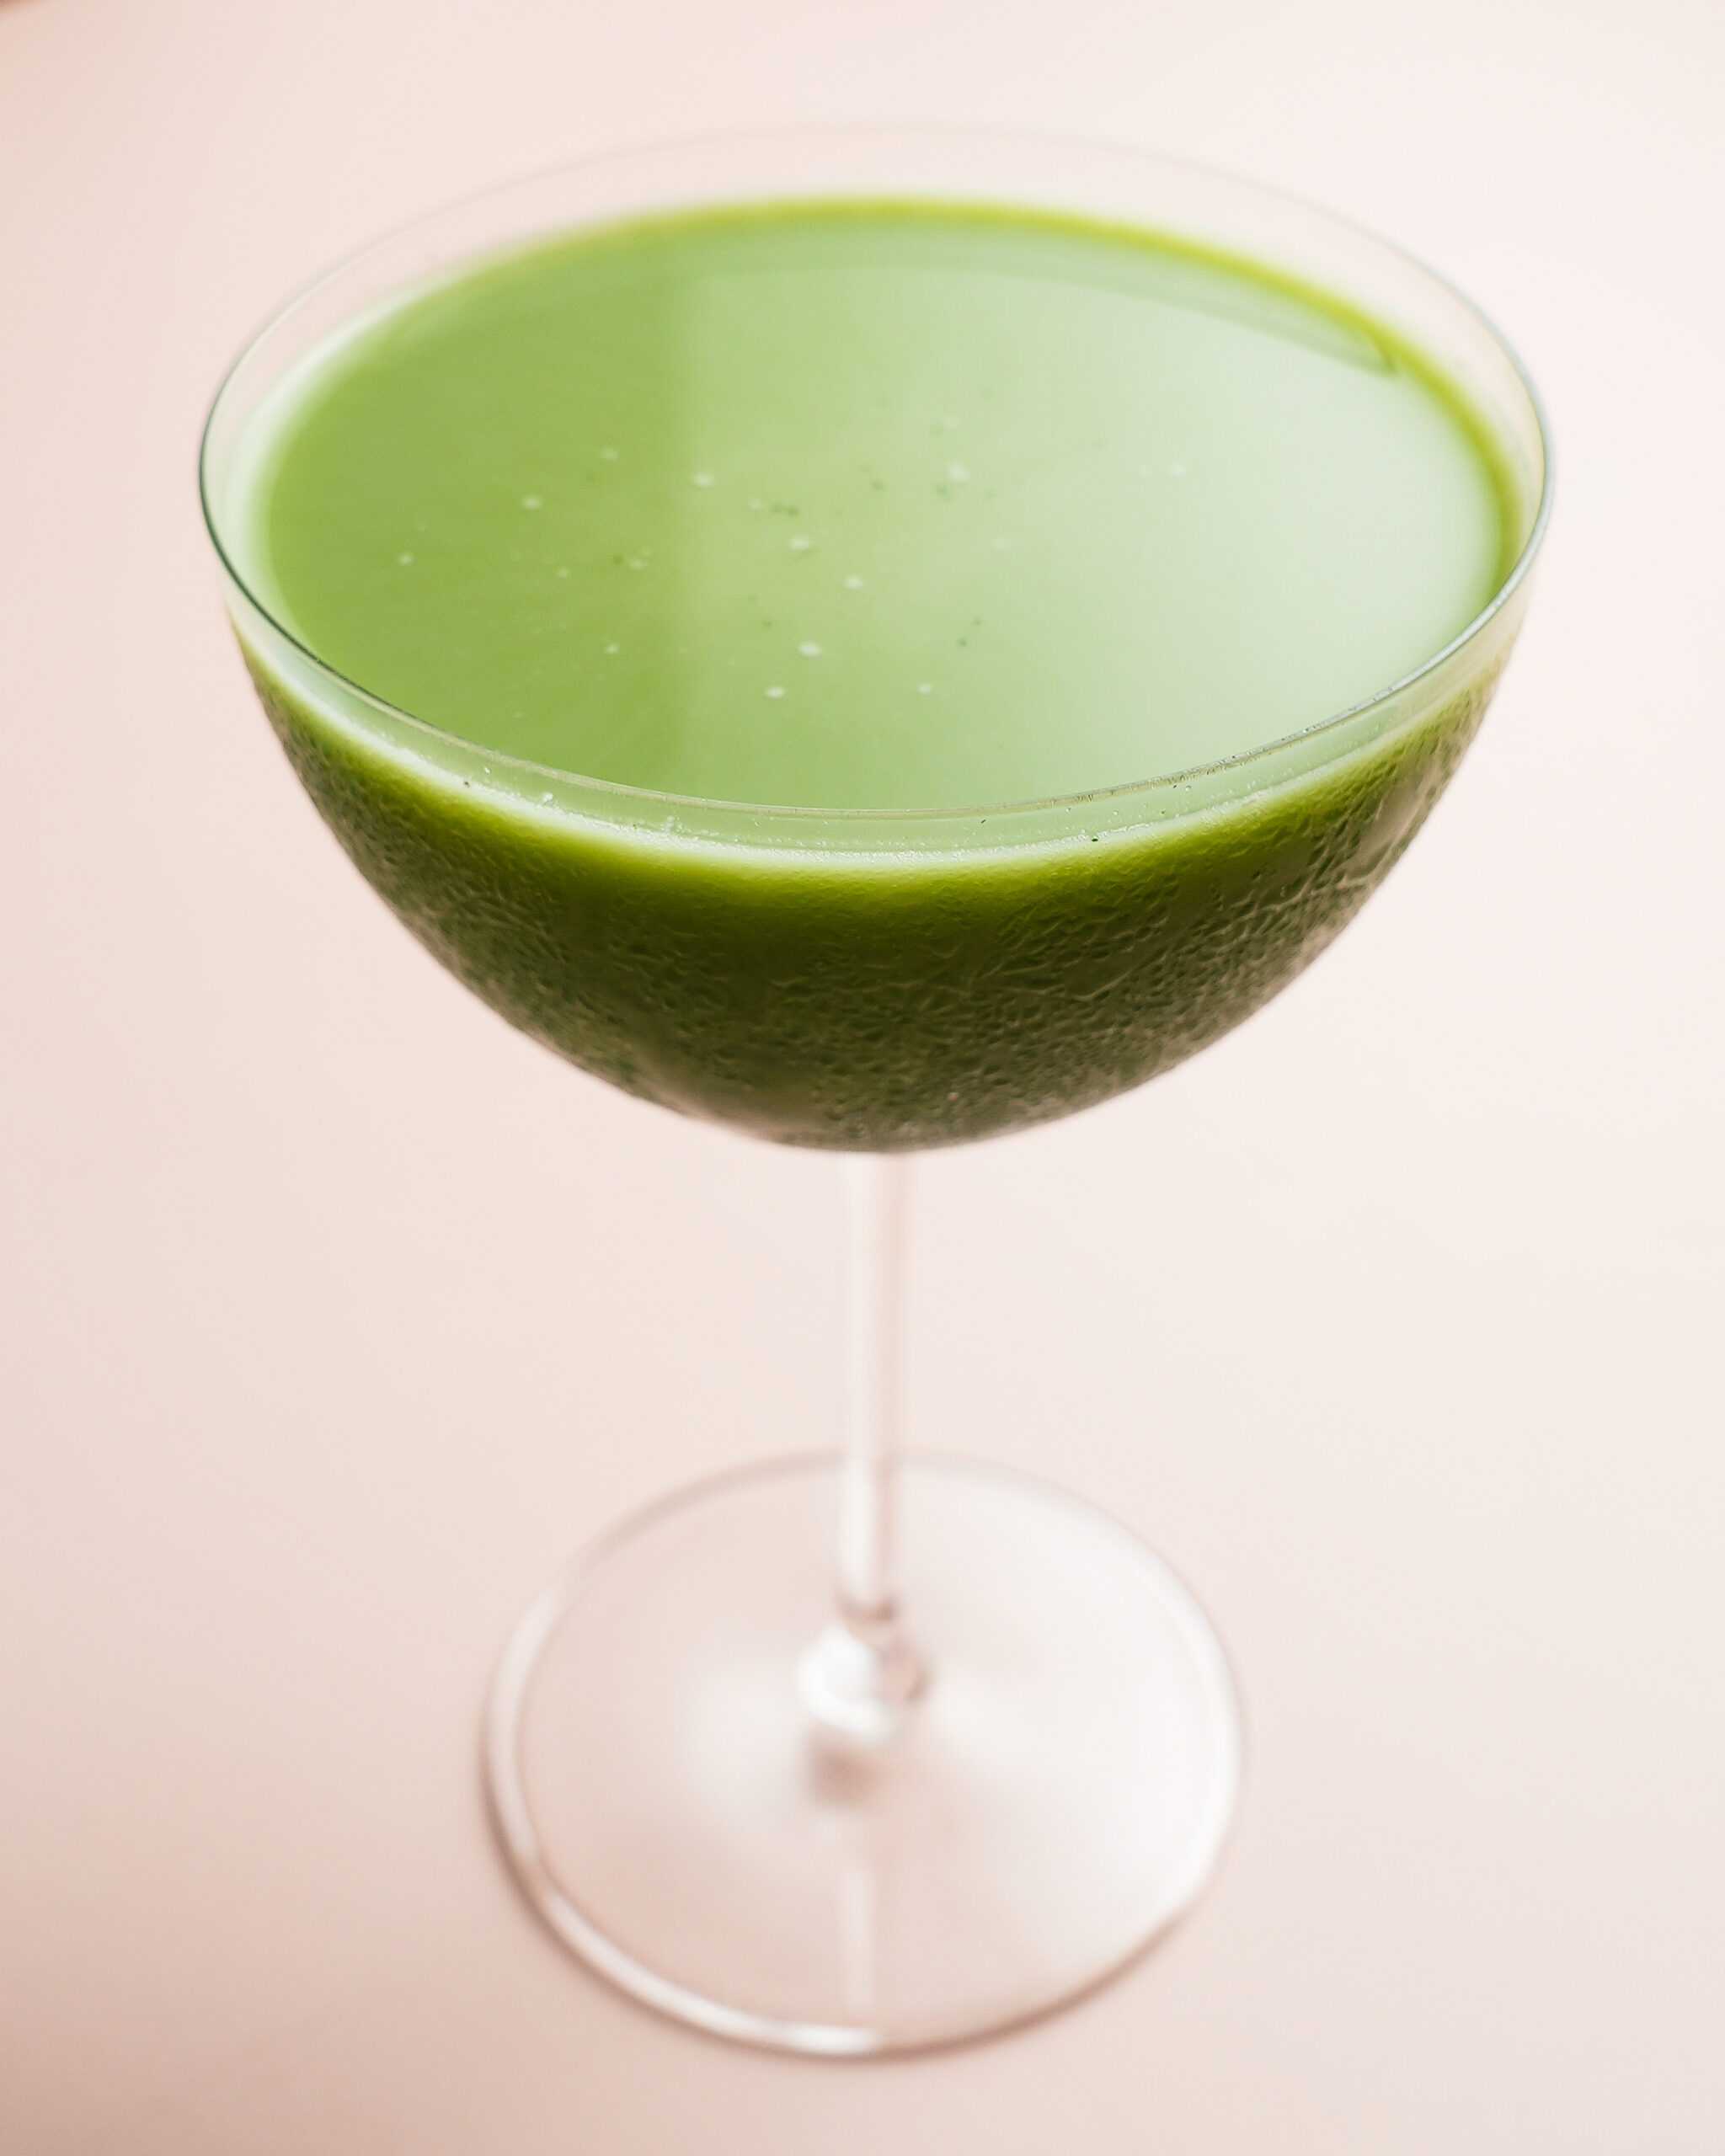 A bright green matcha martini in a stemmed glass sits at the center of the image.